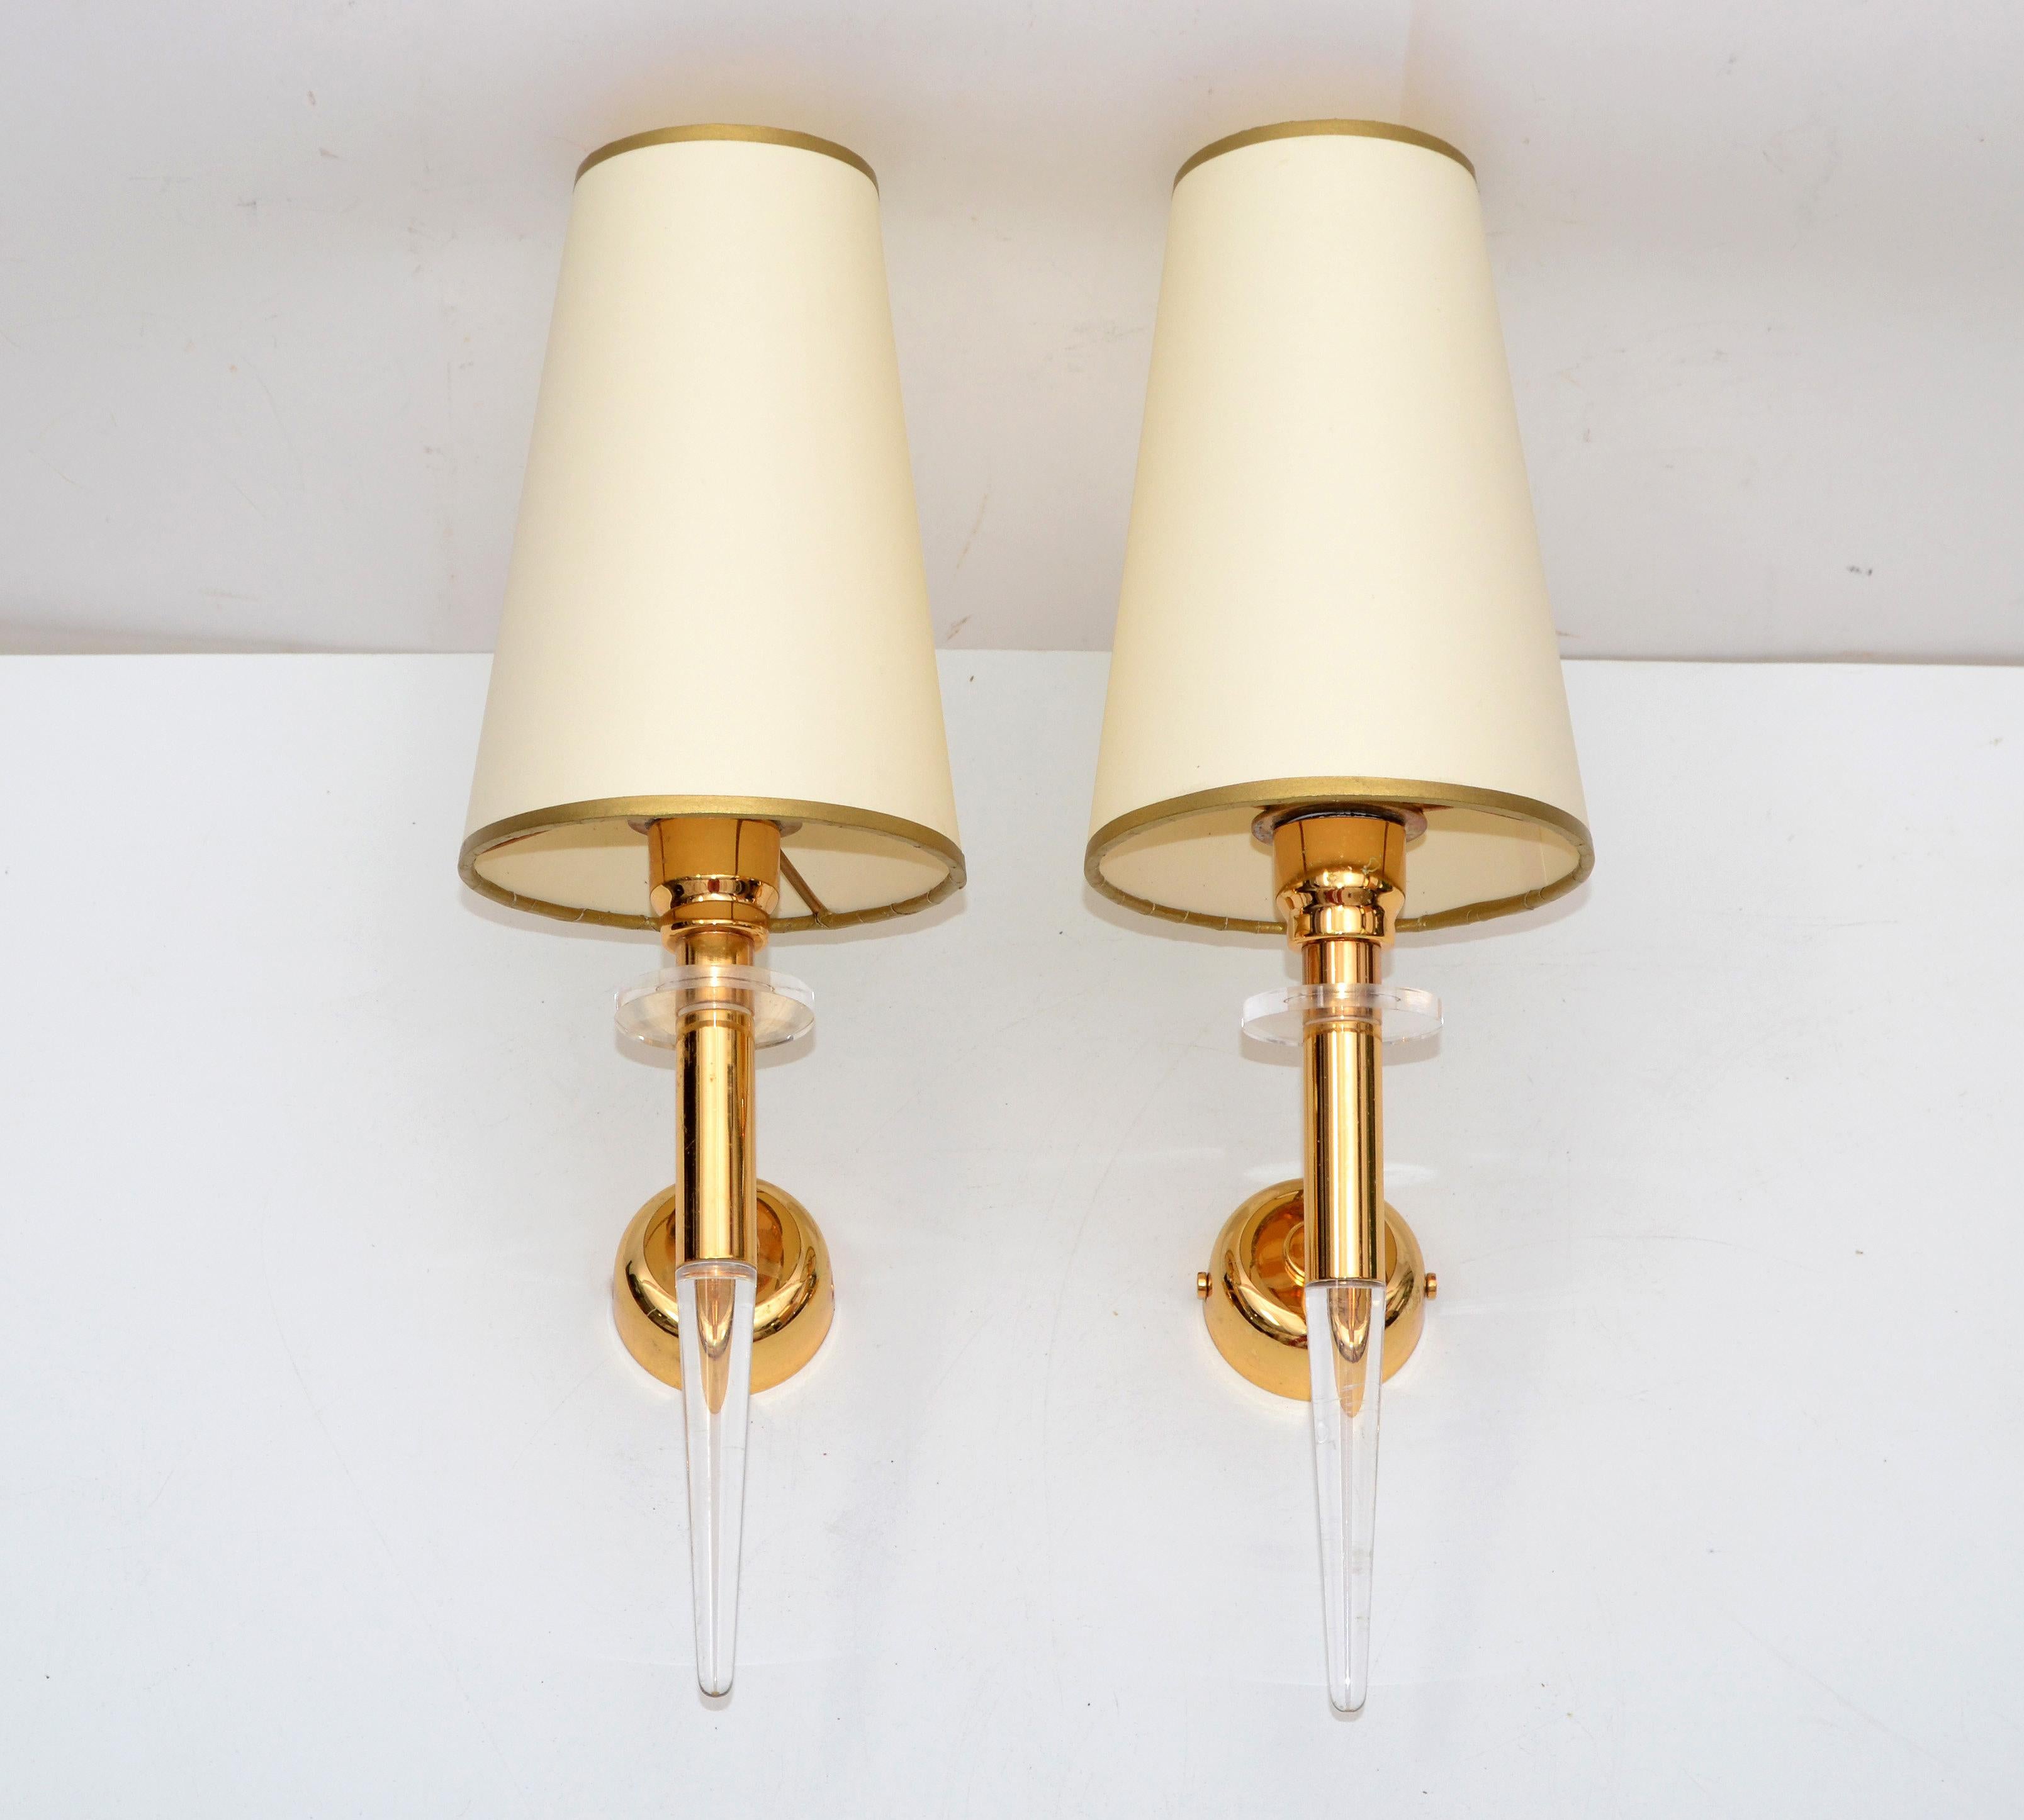 Superb pair of Stilkronen Sconces, made in Italy, crystal glass and gold finish.
Each sconce takes one E14 max 40 watt light bulb.
In perfect working condition and the pair can be US rewired.
Marked Made in Italy with foil label inside the back